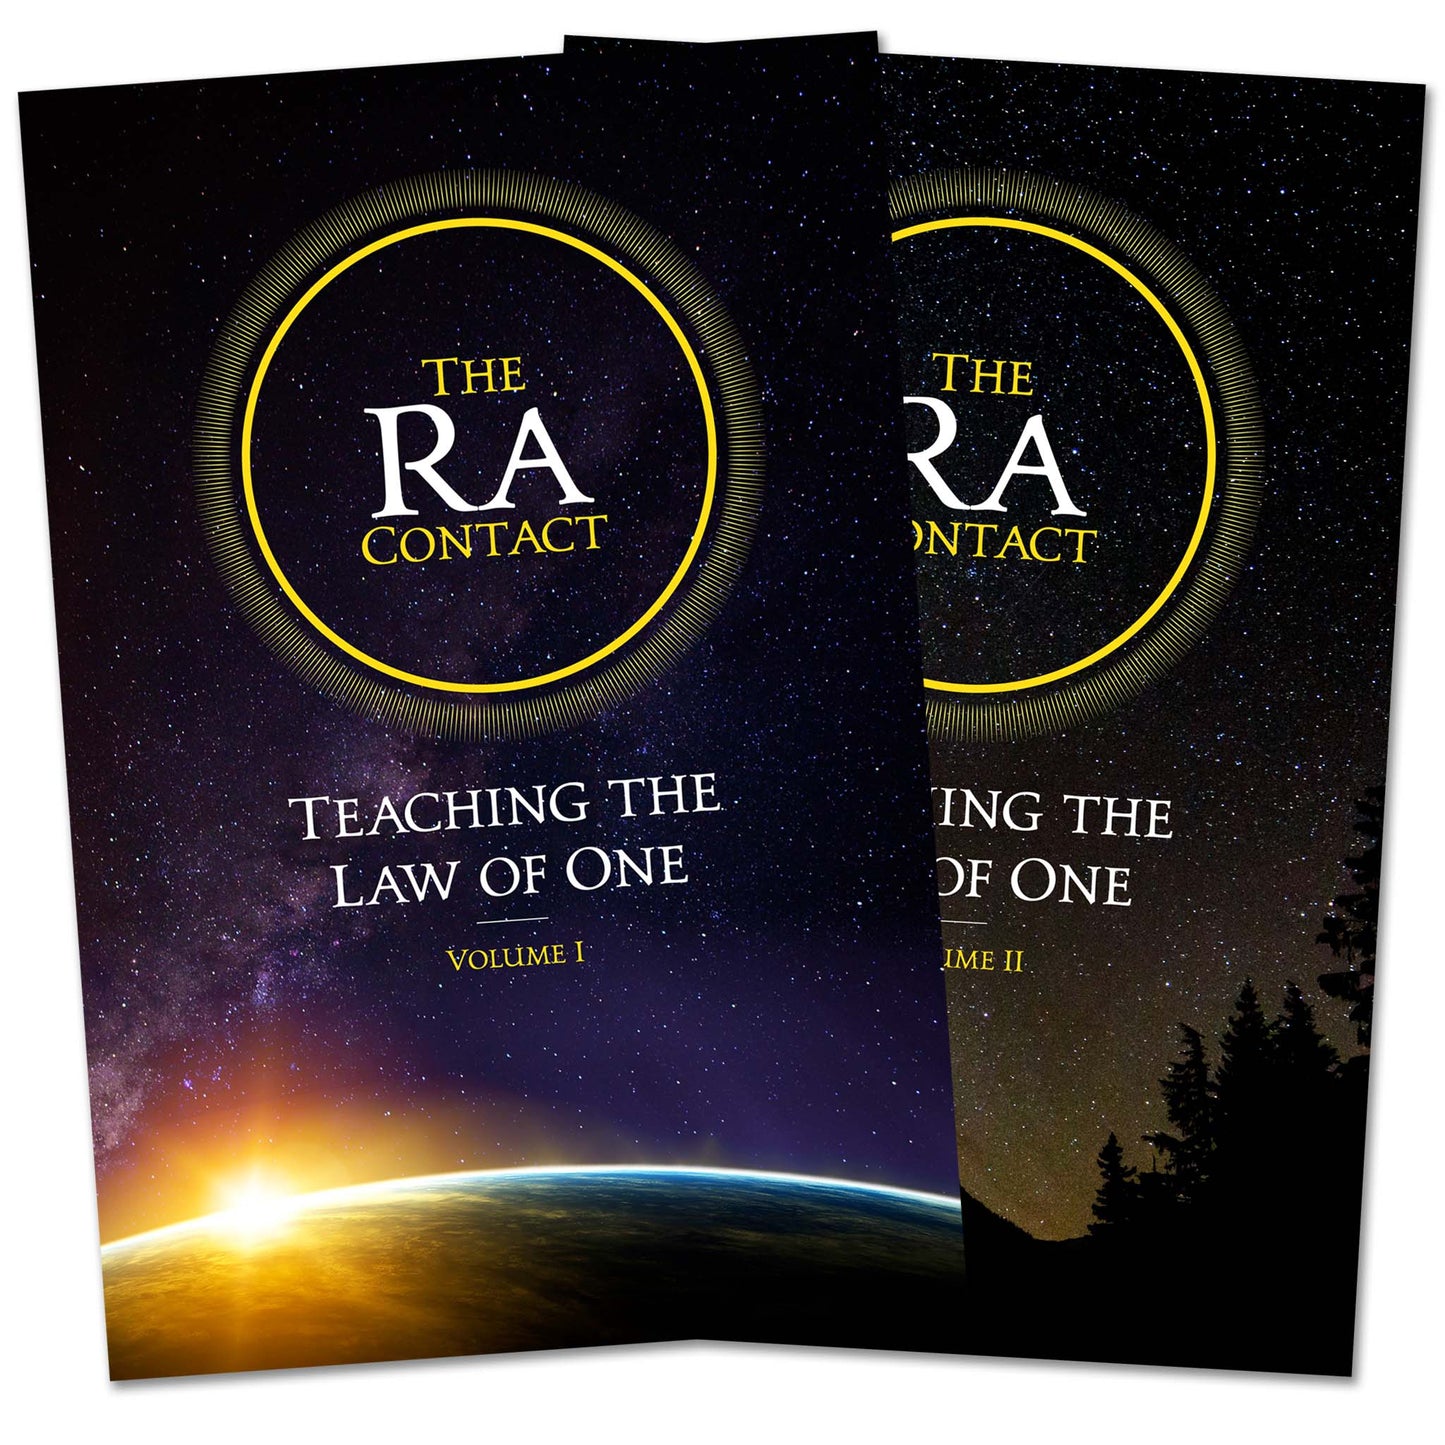 The Ra Contact: Teaching the Law of One - Complete Set (Volumes 1 & 2)